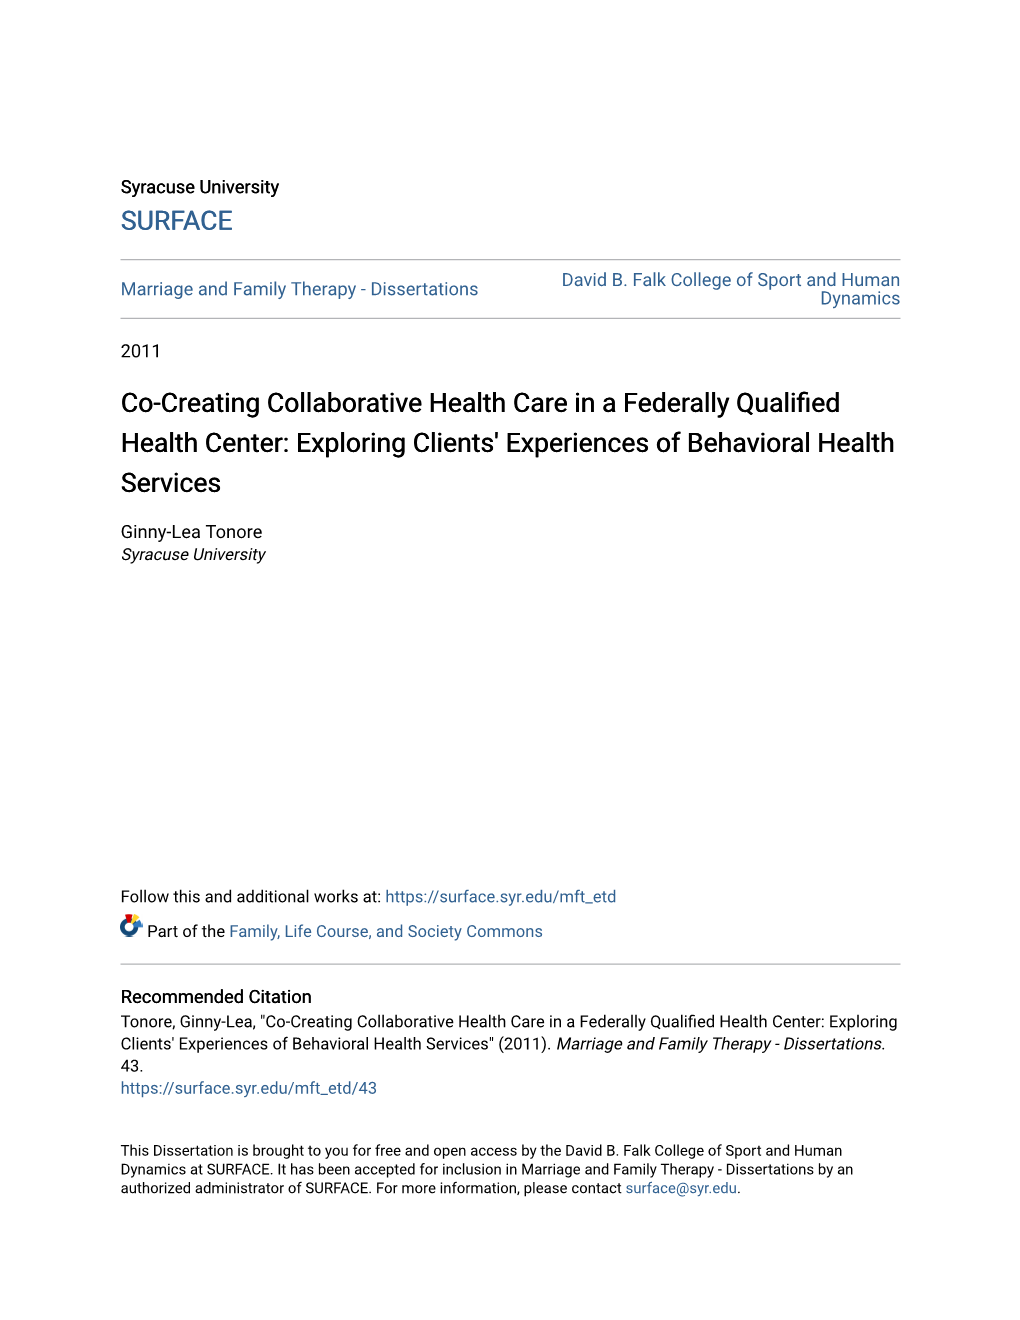 Co-Creating Collaborative Health Care in a Federally Qualified Health Center: Exploring Clients' Experiences of Behavioral Health Services